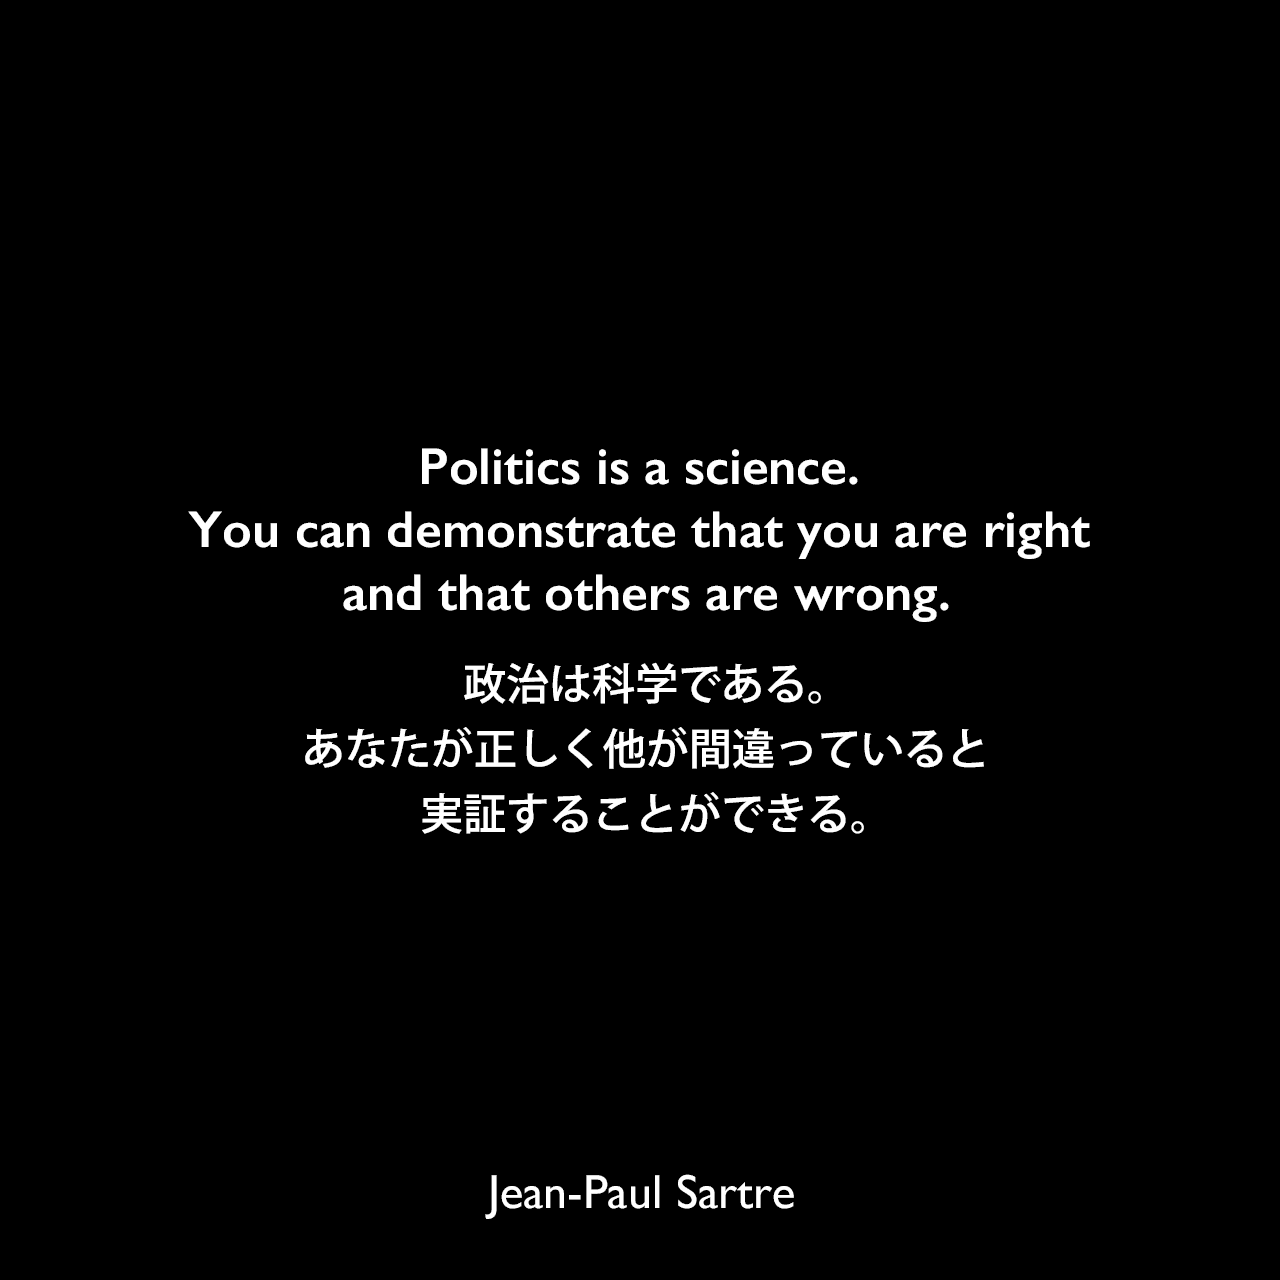 Politics is a science. You can demonstrate that you are right and that others are wrong.政治は科学である。あなたが正しく他が間違っていると実証することができる。- サルトルによる戯曲「Maile Hath」よりJean-Paul Sartre